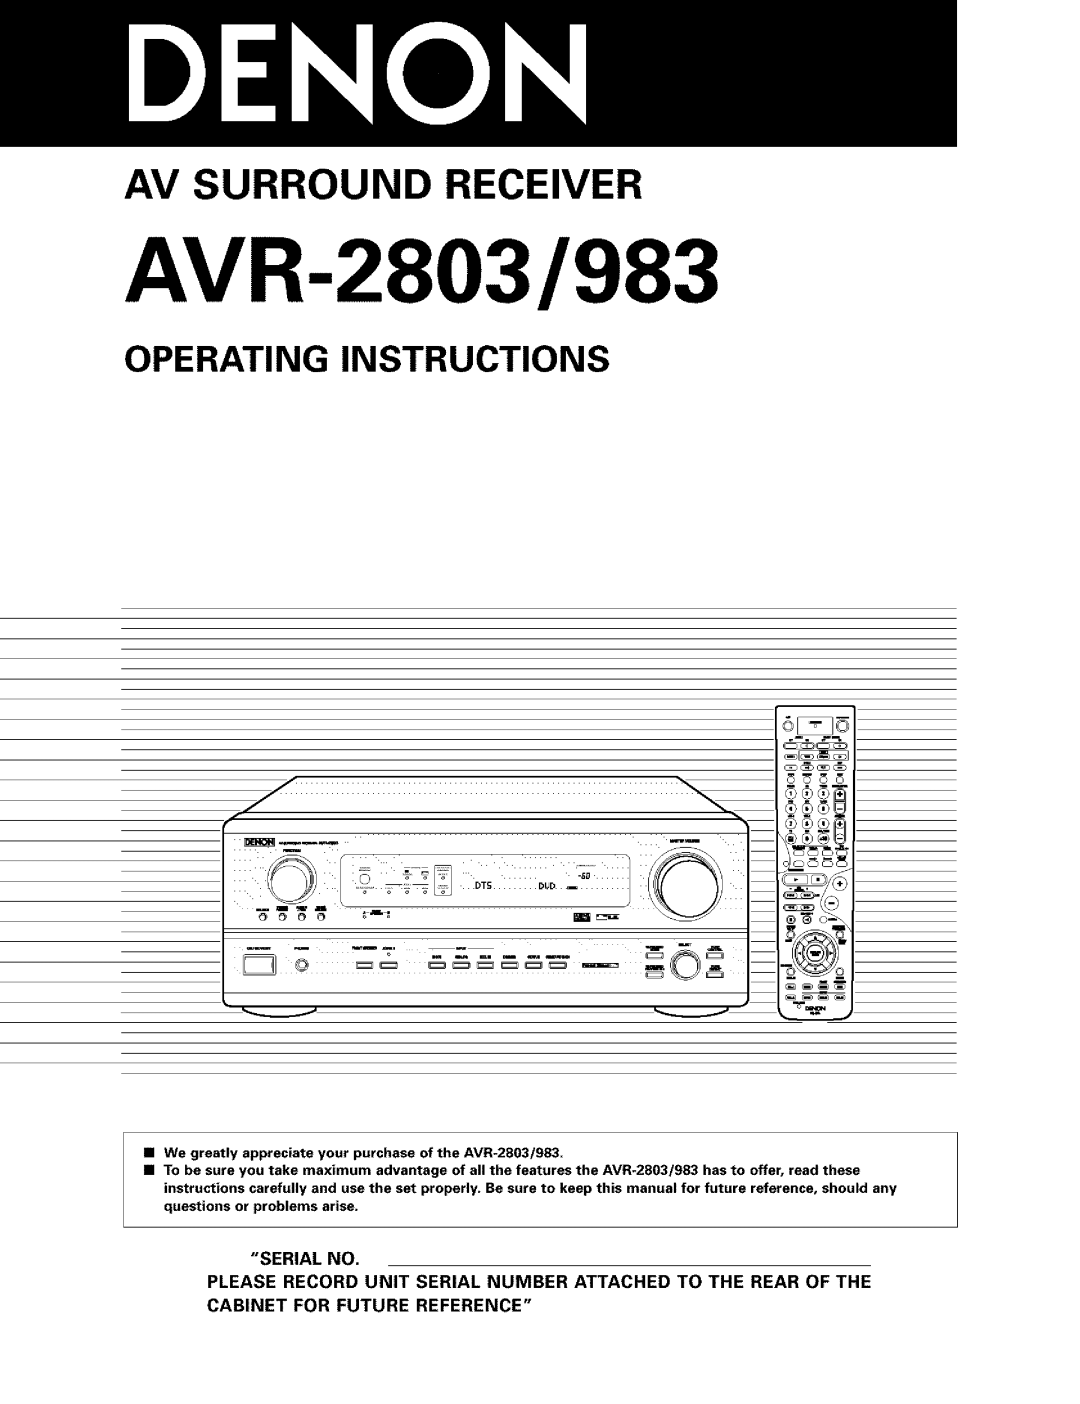 Denon AVR-2803/983 manual Operating Instructions, Cabinet For Future Reference, Av Surround Receiver, Serial No 